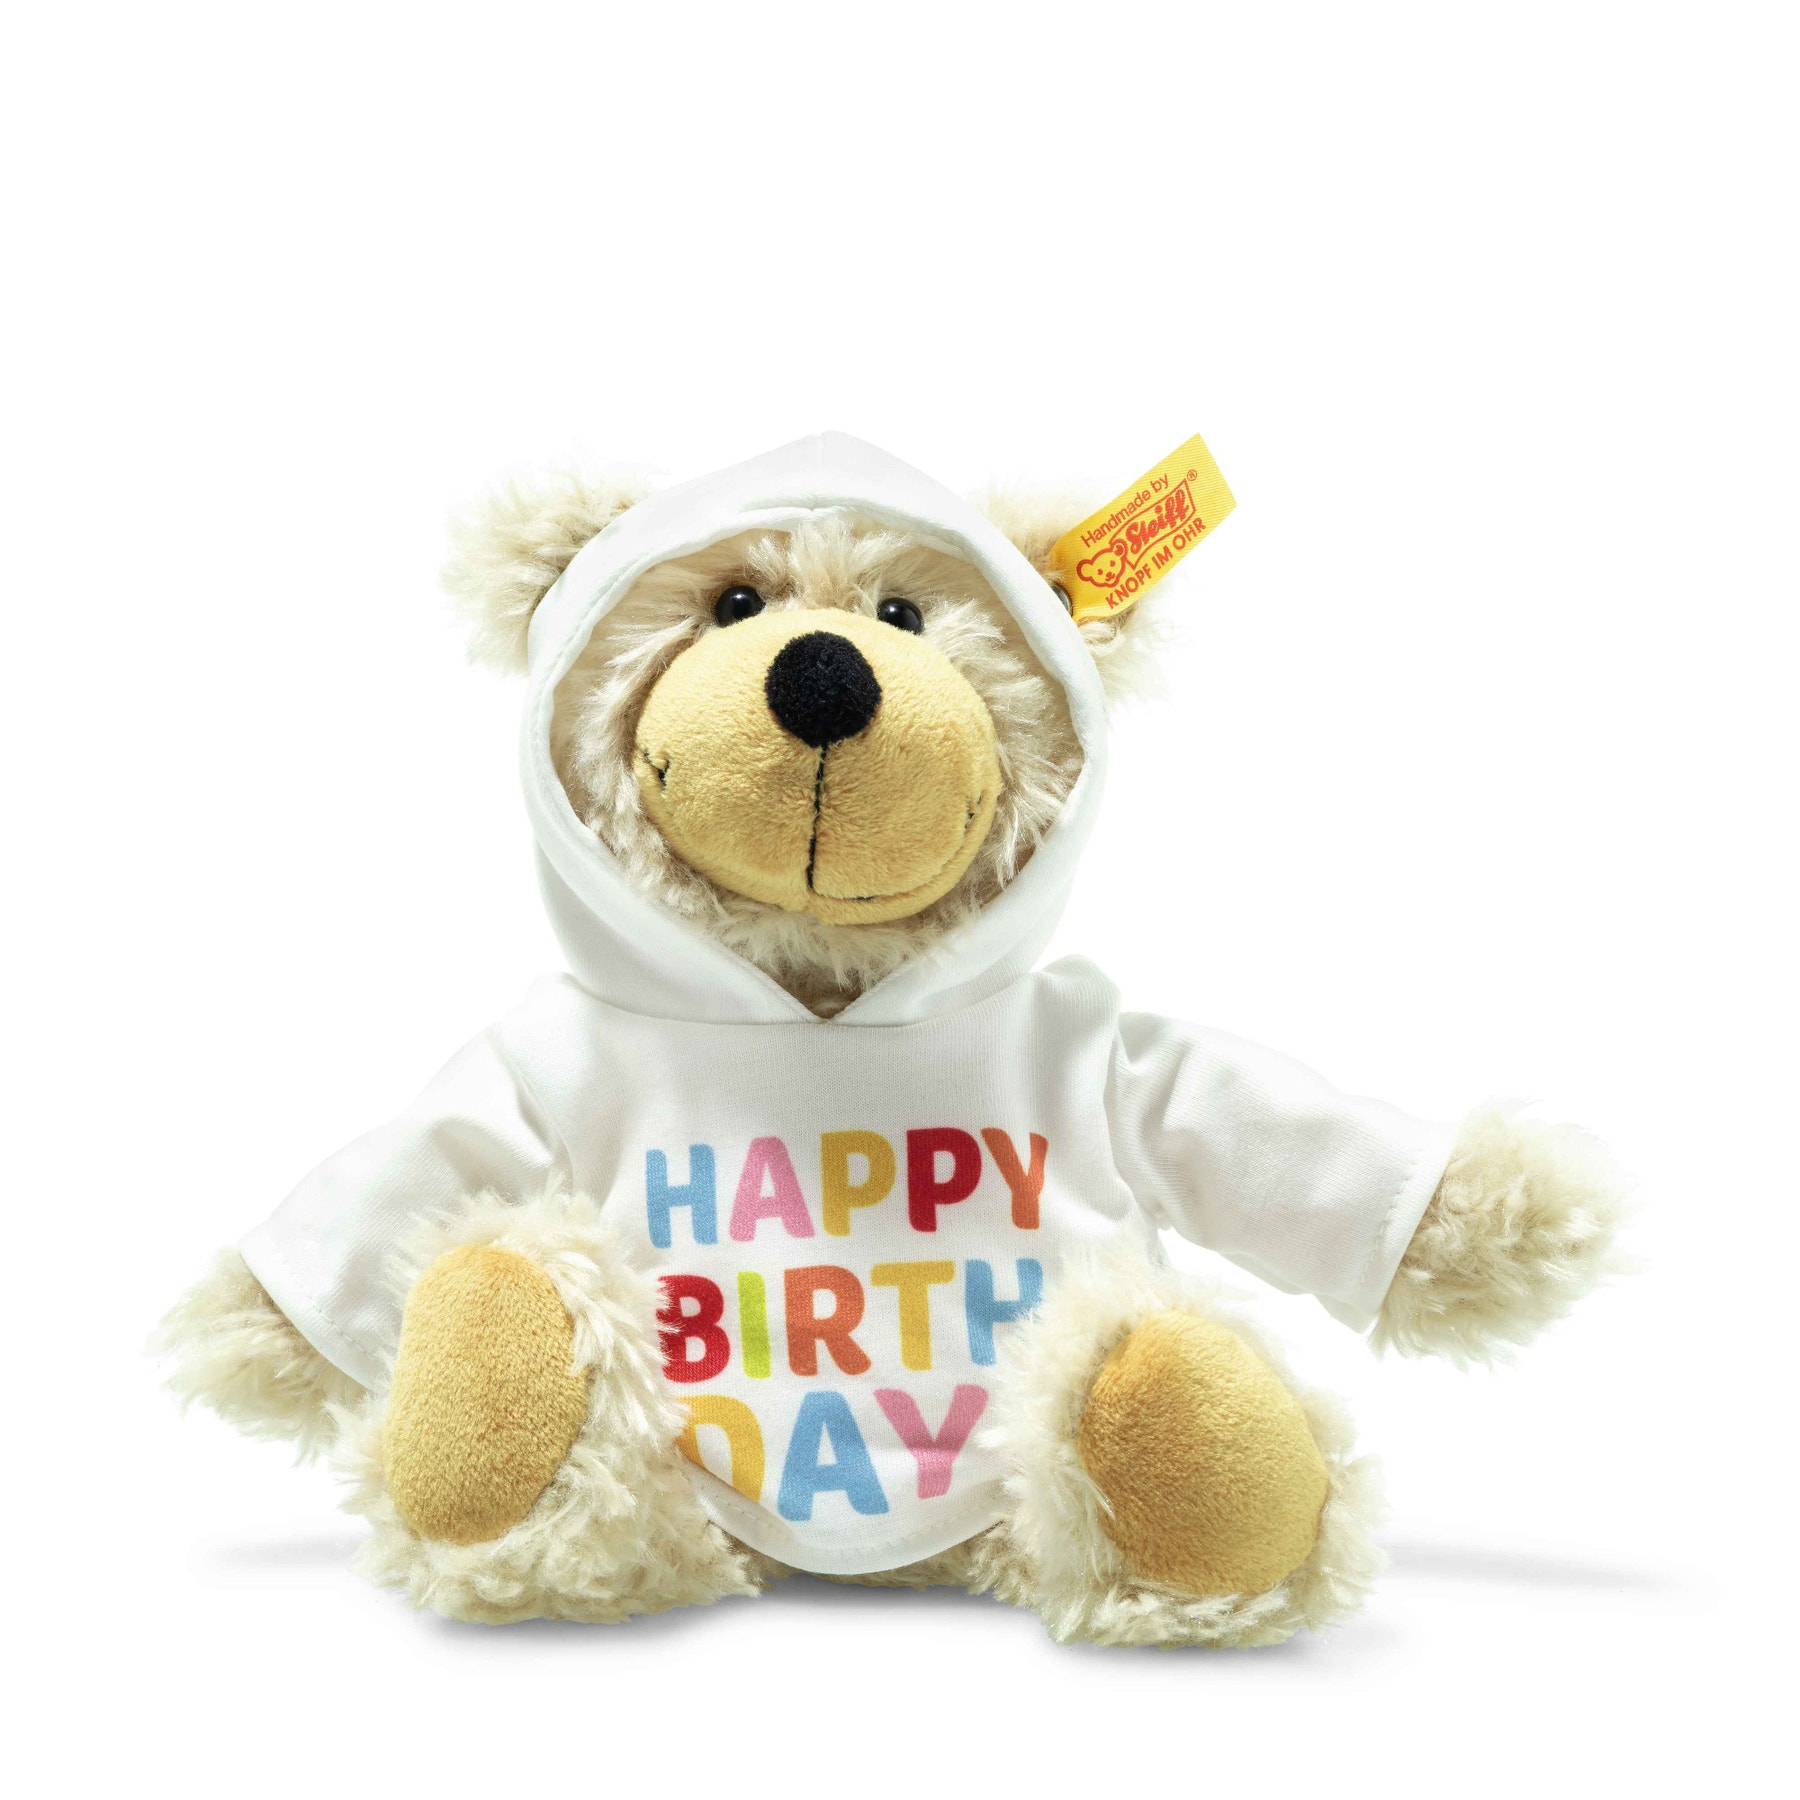 Ours Teddy-pantin Charly Happy Birthday avec sweat à capuche